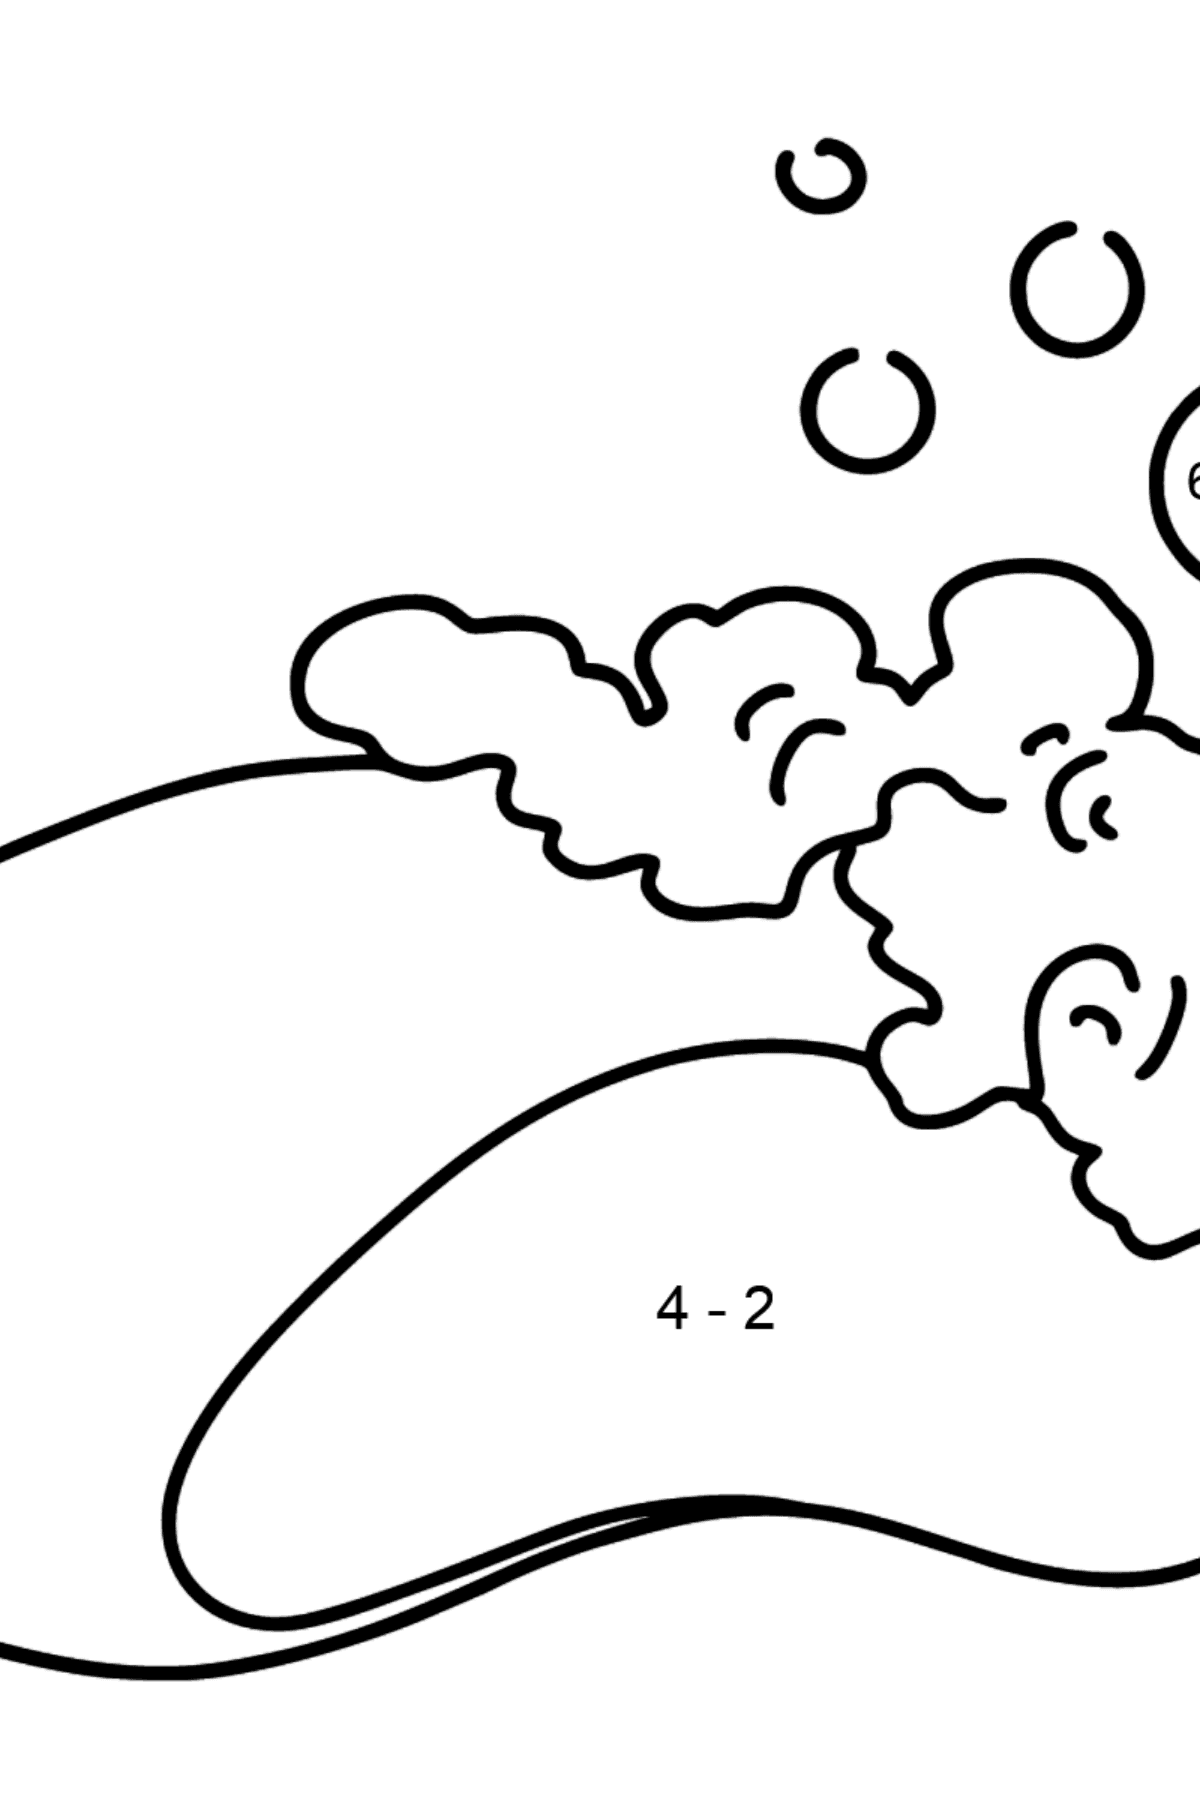 Soap coloring page - Math Coloring - Subtraction for Kids